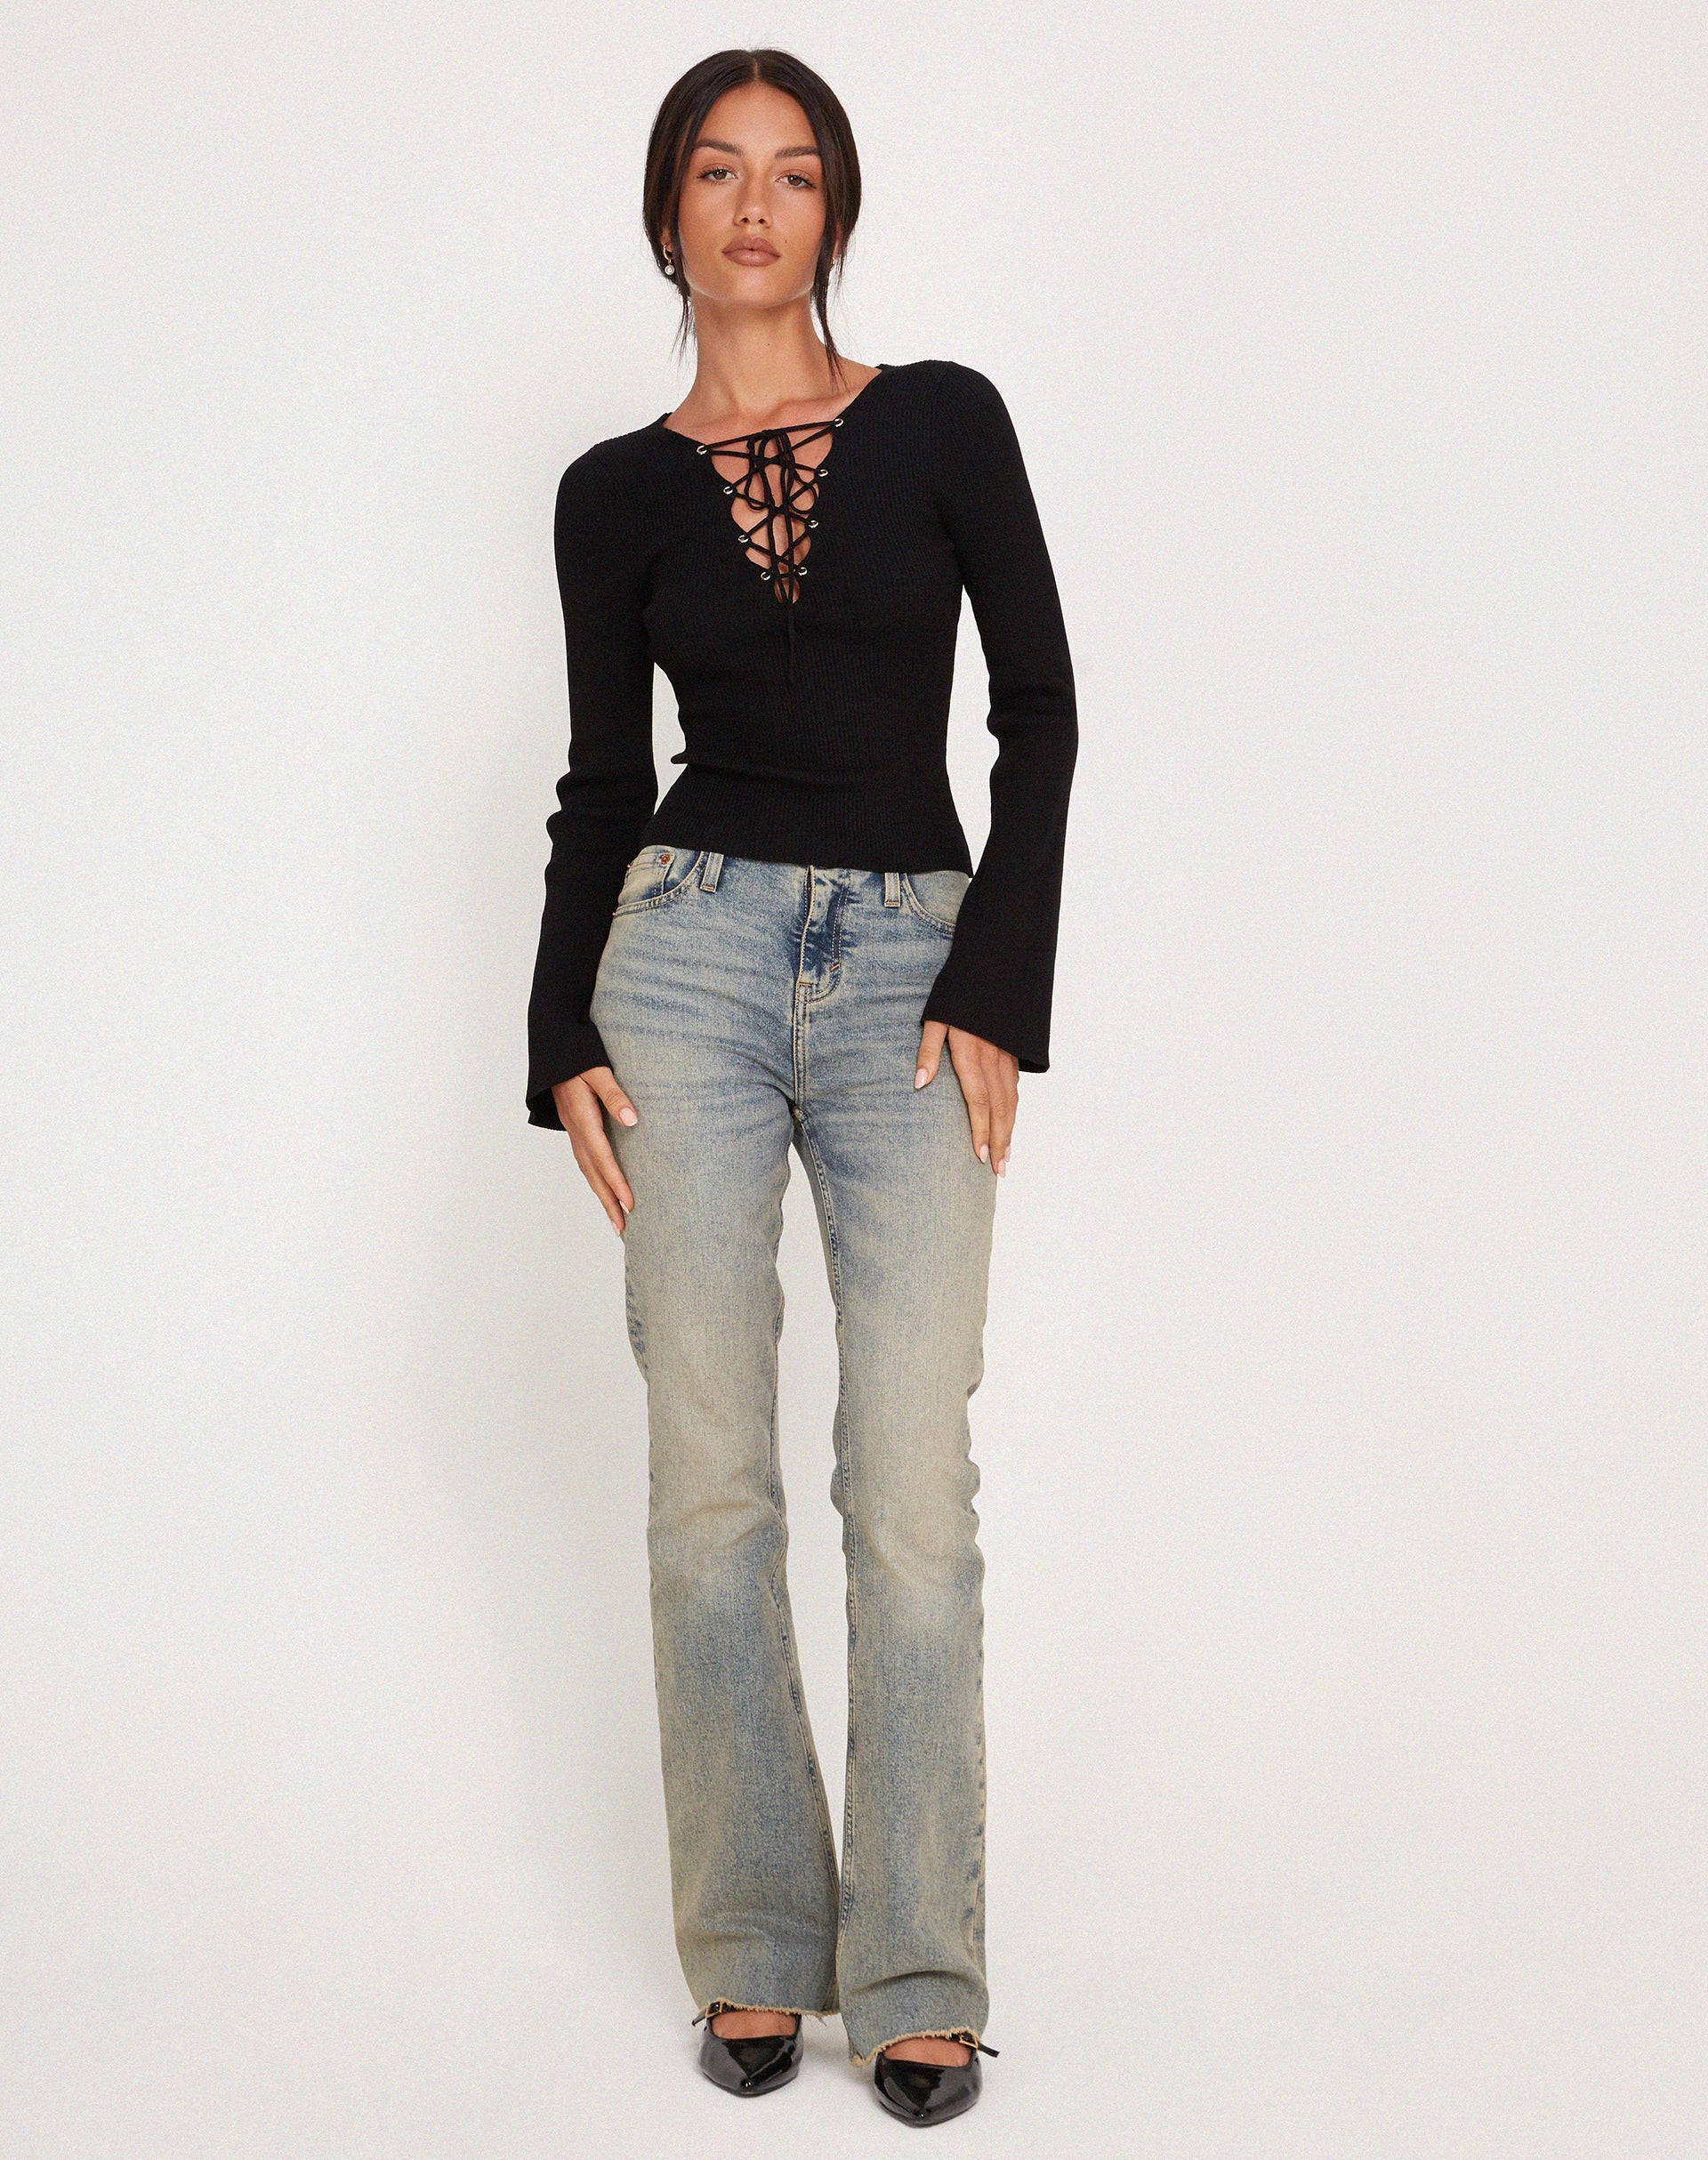 Image of Issey Long Sleeve Lace up Top in Black